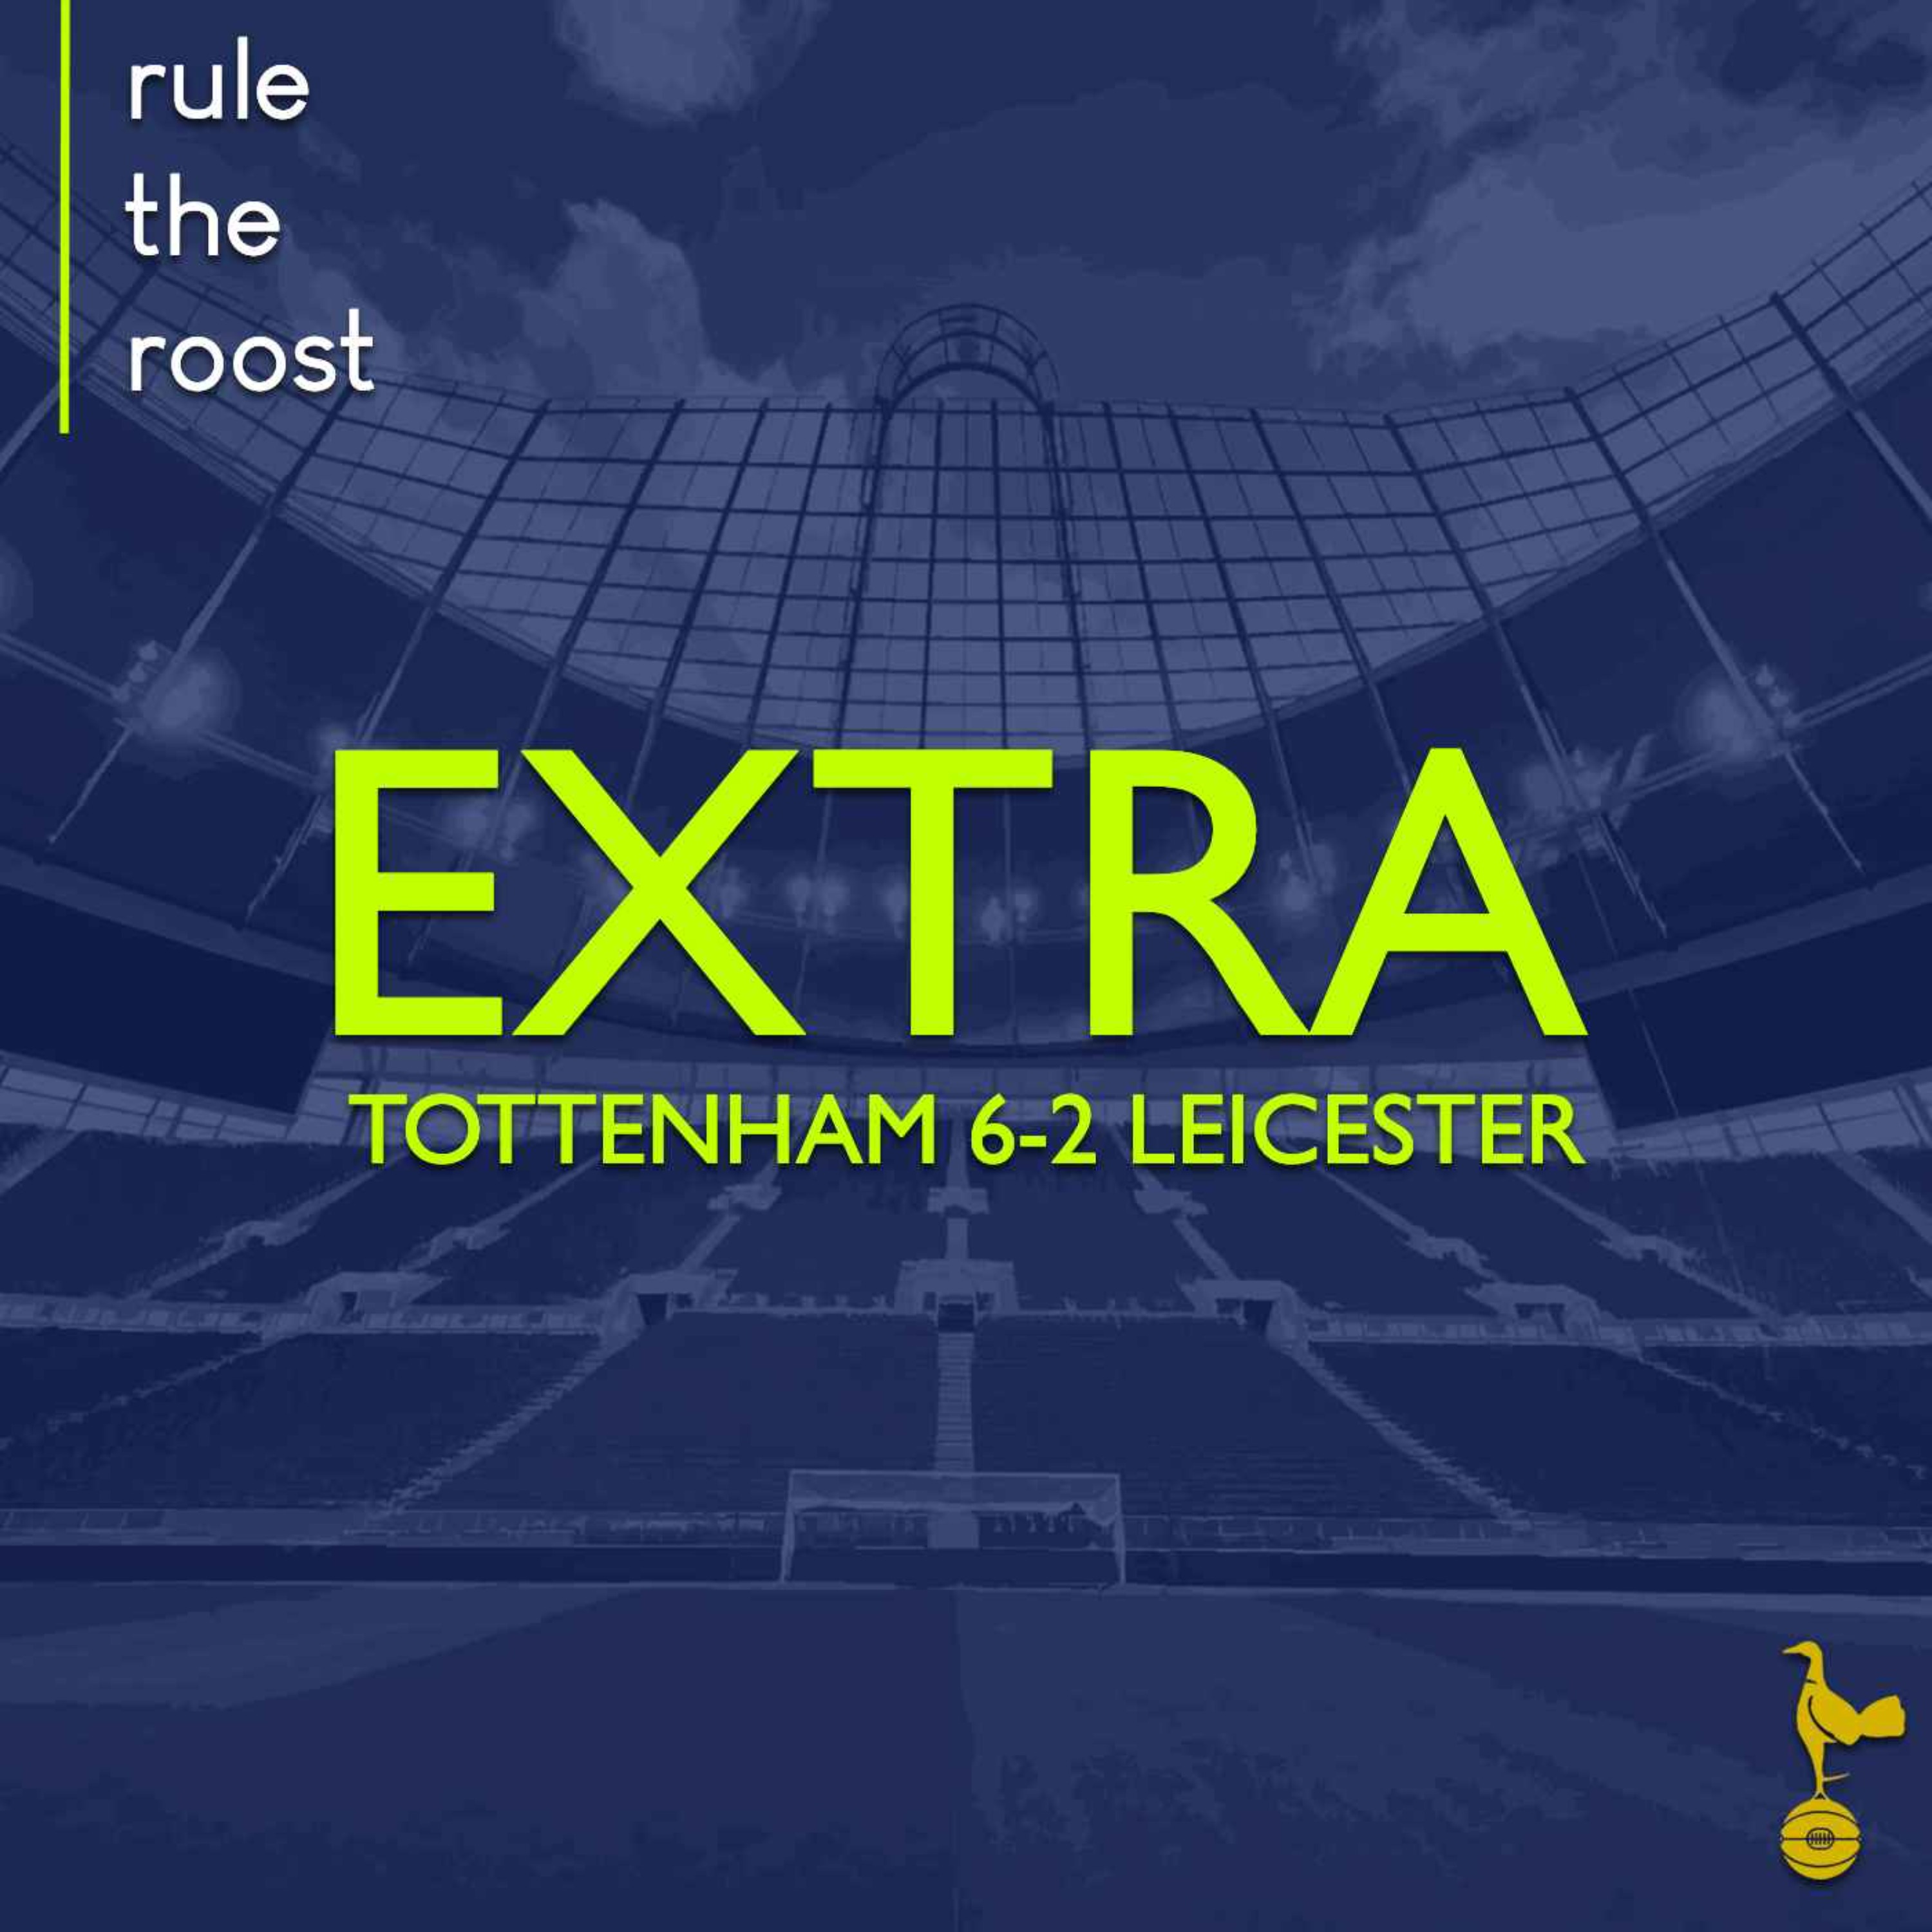 RTR EXTRA: Tottenham 6-2 Leicester